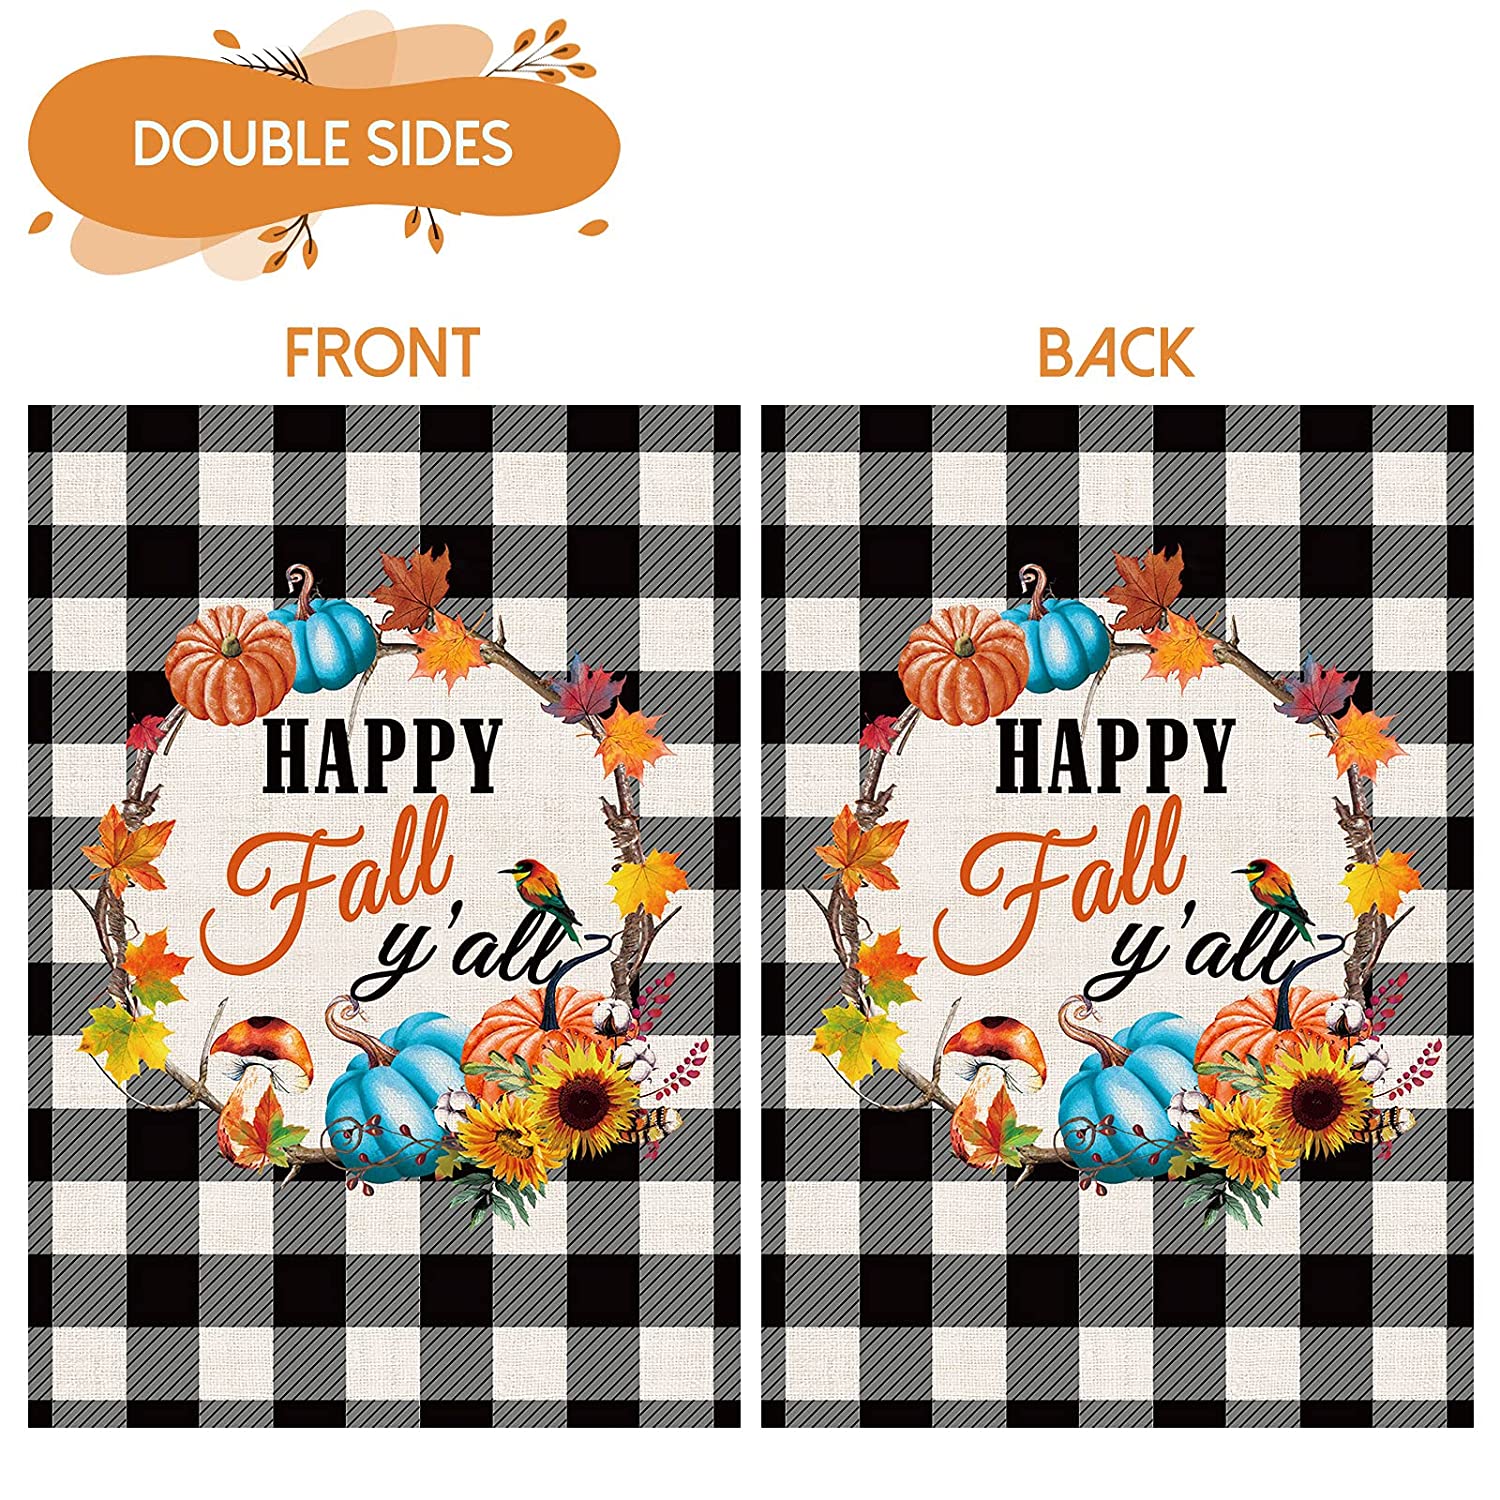 2 Pcs Welcome Fall Garden Flags 12x18 Double Sided, Burlap Harvest Pumpkin And Buffalo Plaid Happy Fall Y'all Wreath Thanksgiving Garden Flags, Outdoor Yard Decors for Pumpkin Patch Farmhouse